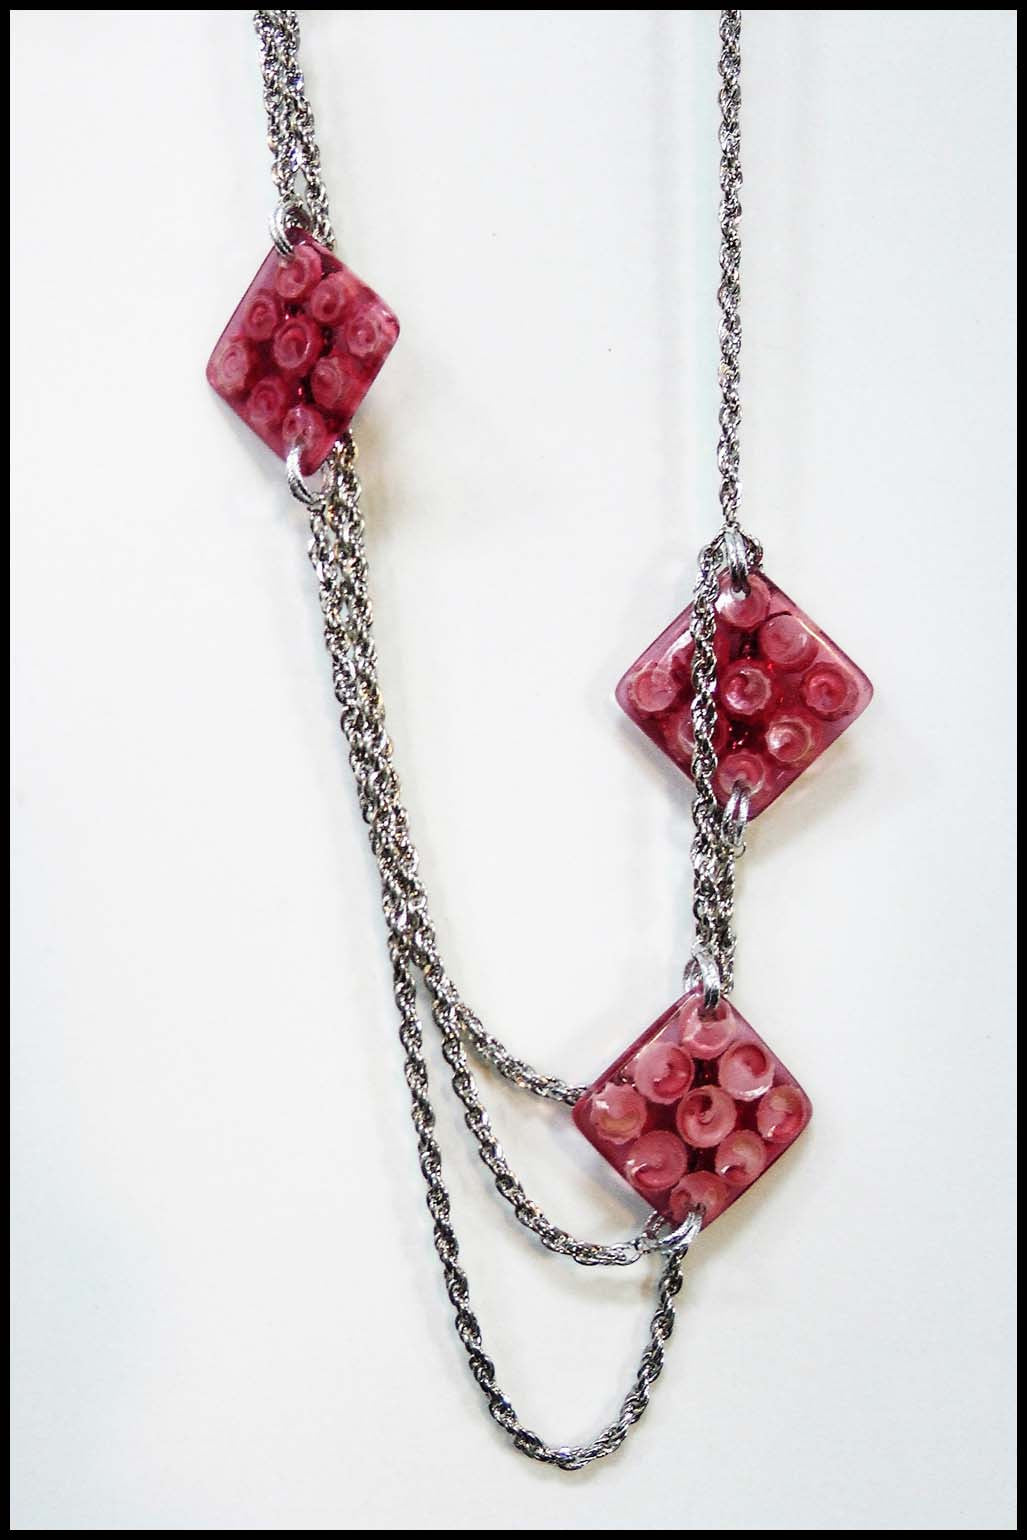 Offset Square Bead Necklace